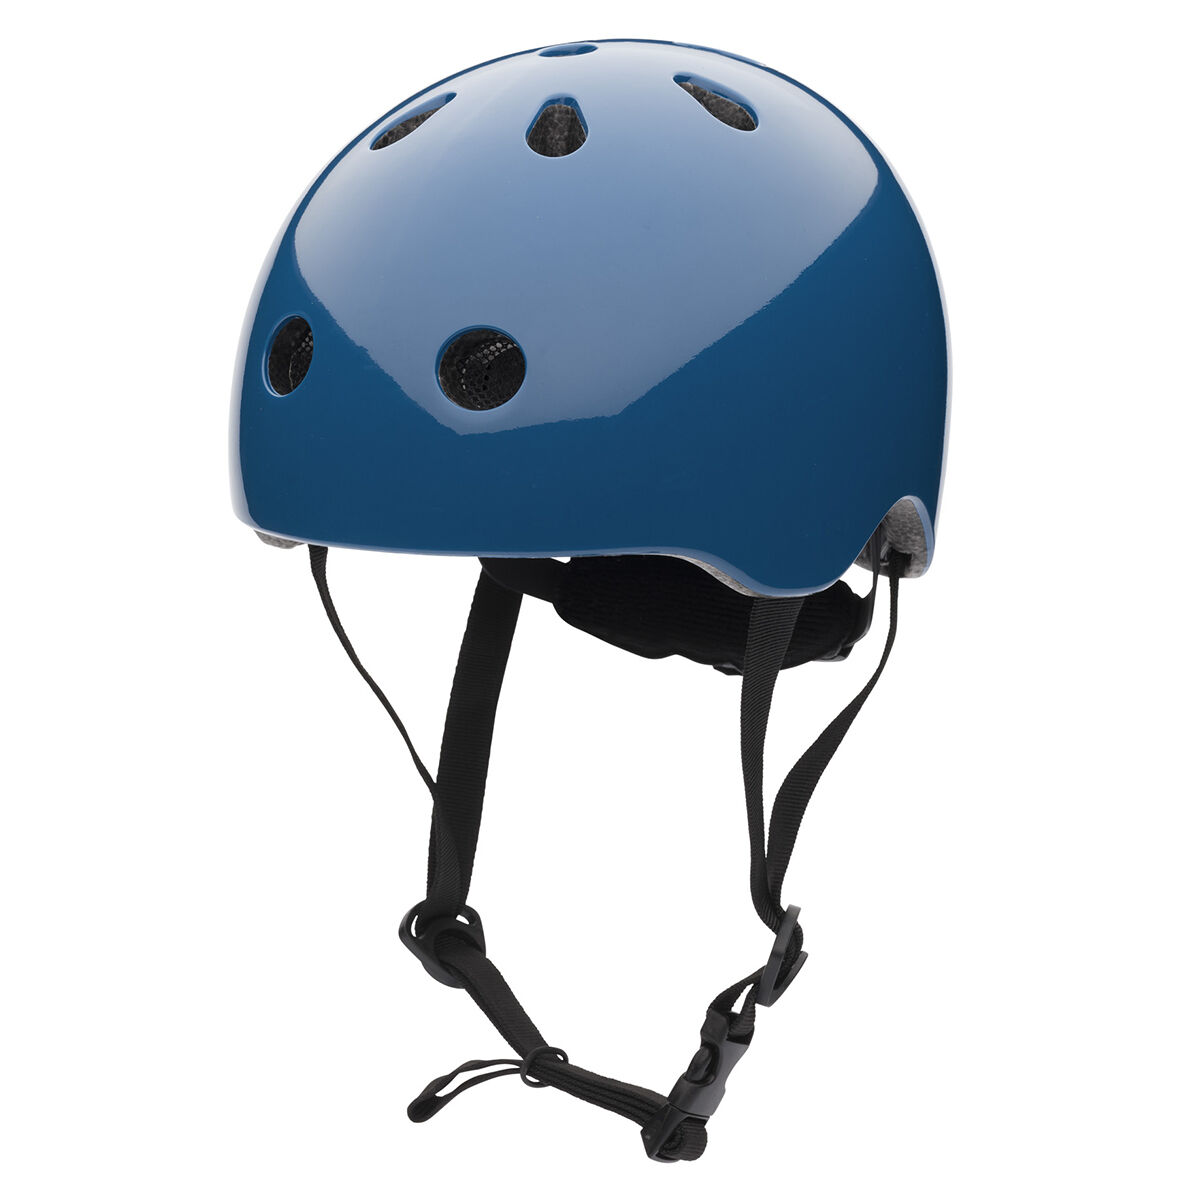 Trybike Casque Coconuts Vintage Bleu - Taille XS